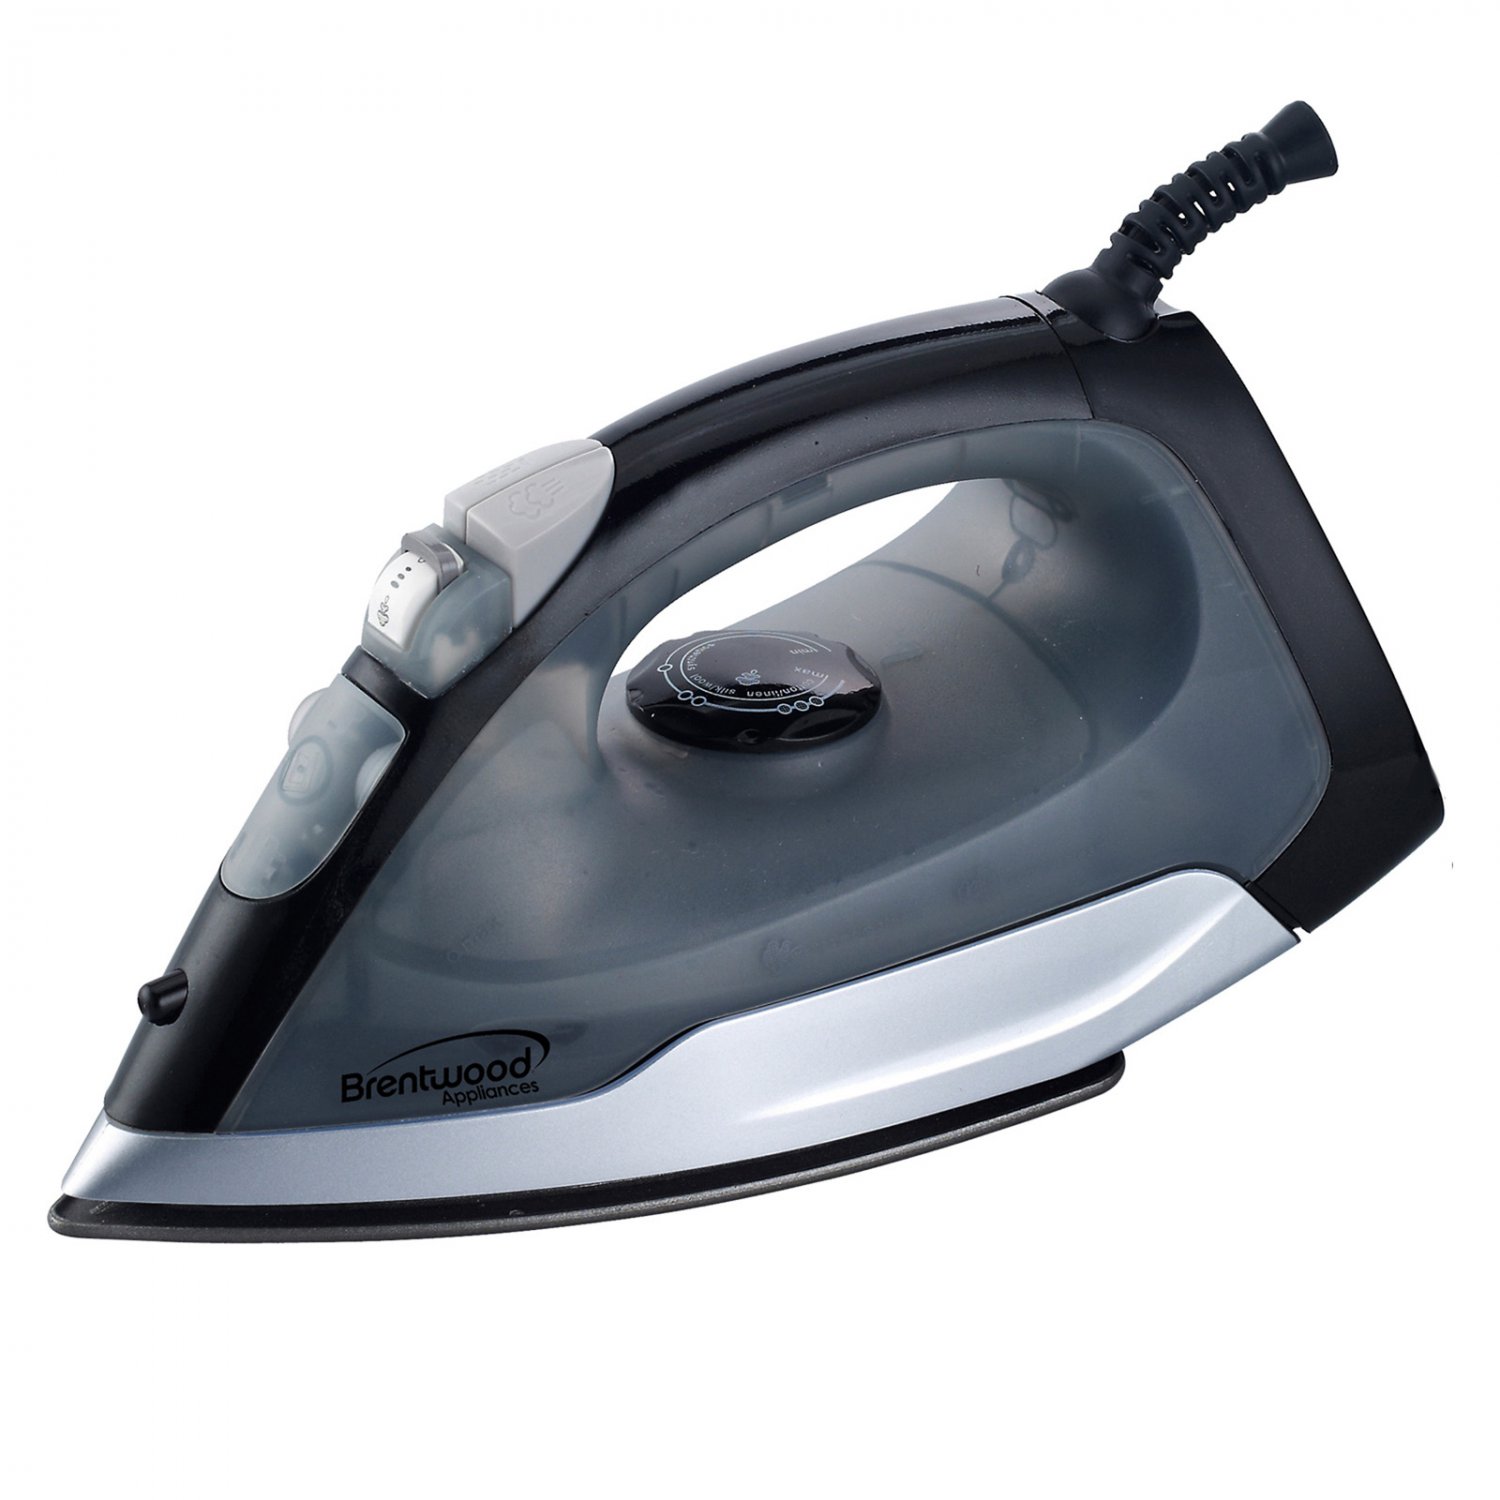 Brentwood Full Size Steam Spray Dry Iron in Black and Gray